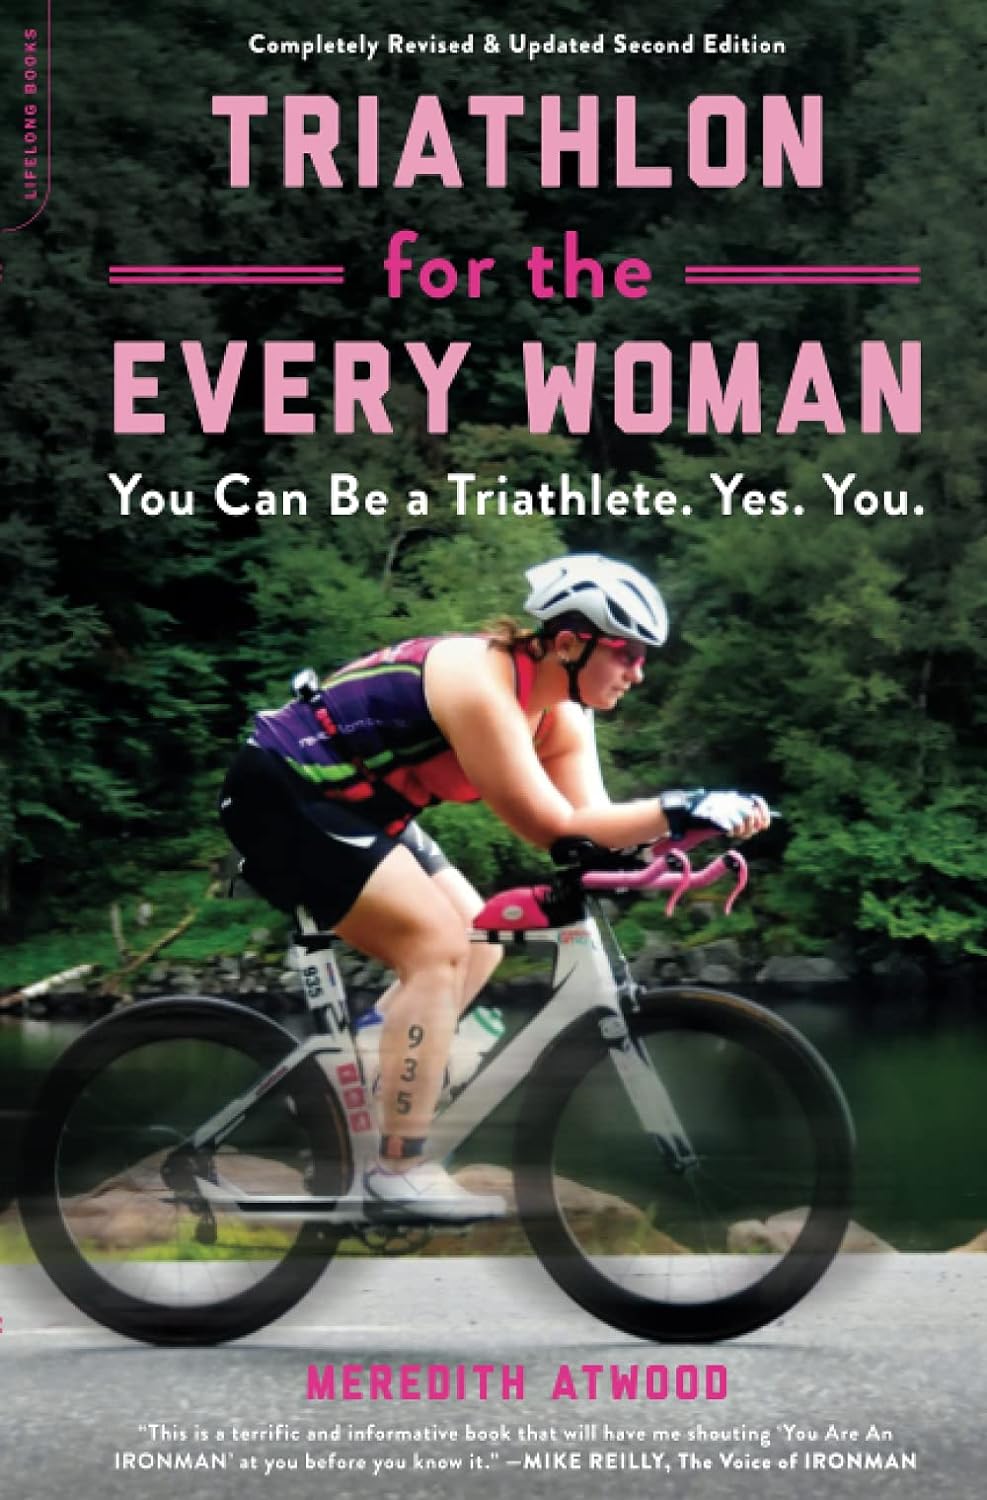 Triathlon for the Every Woman: You Can Be a Triathlete. Yes. You. - Meredith Atwood